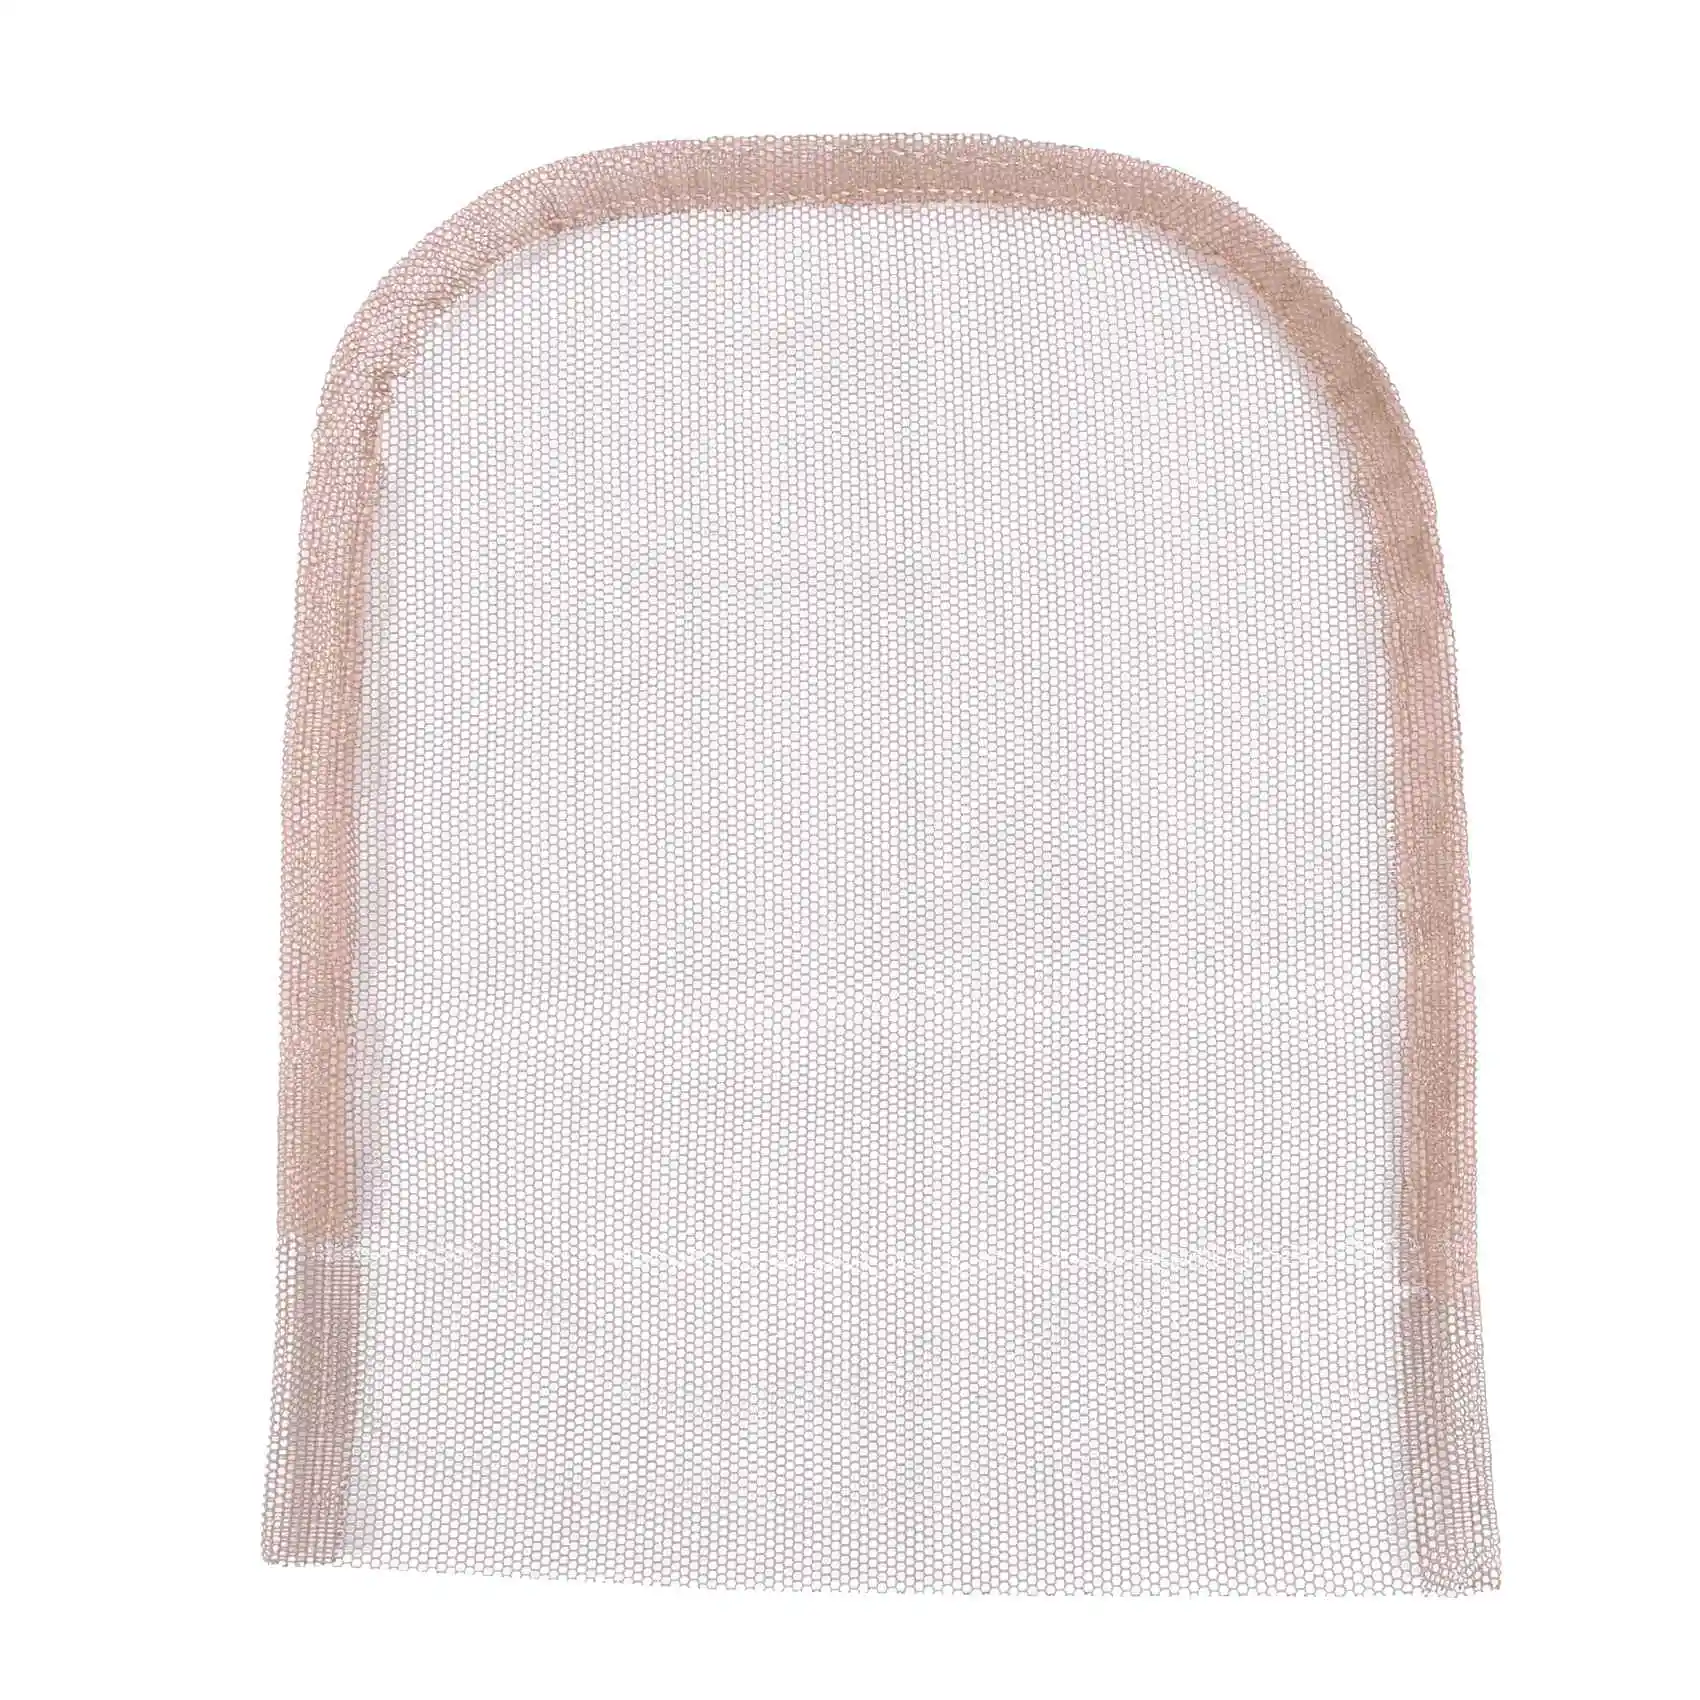 

3PCS 4X4 Swiss Lace Closure Frontal Base Hand-Woven Hair Net Piece for Making Lace Wigs Cap Closure Wig Accessory